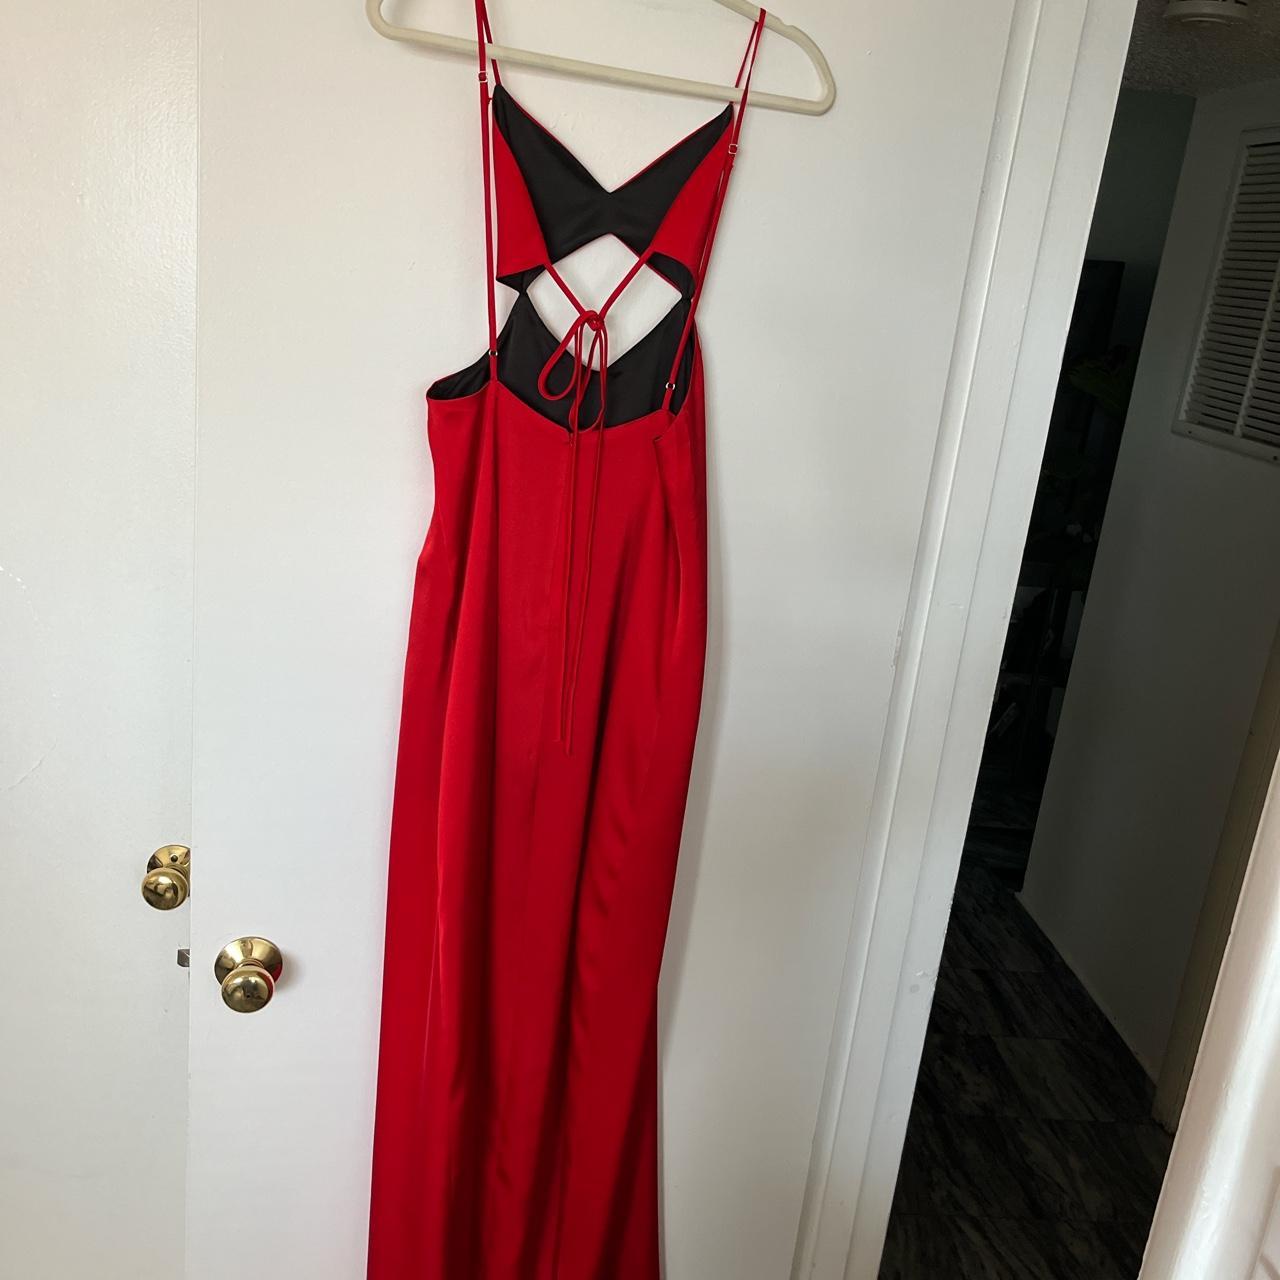 Capulet Women's Red and Black Dress (3)